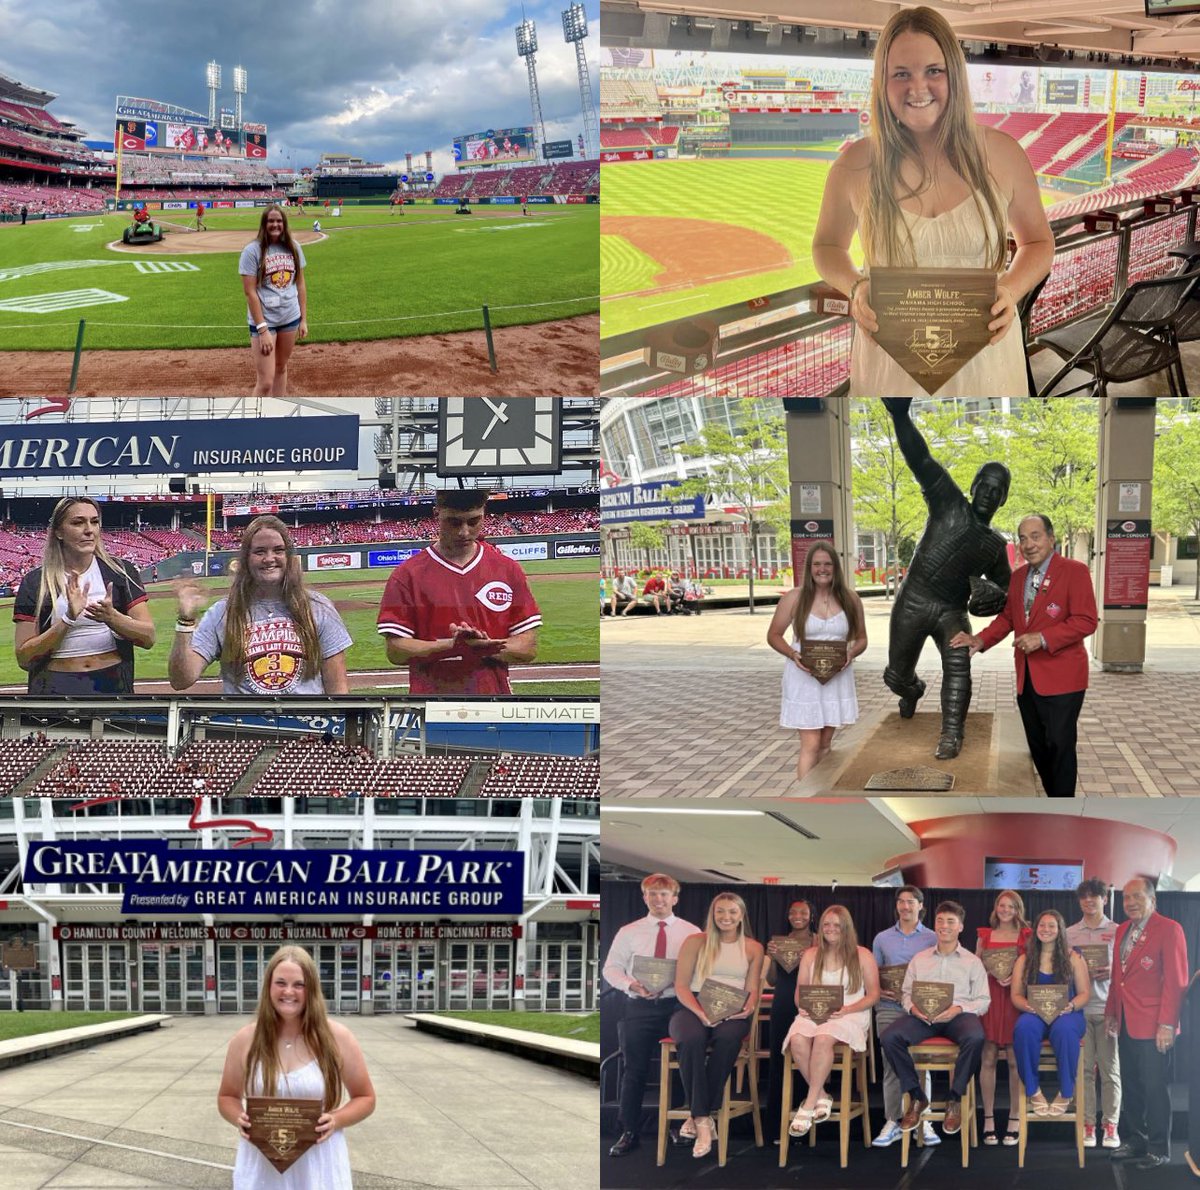 An unforgettable experience! Honored to receive the Johnny Bench award for top WV high school softball catcher. I had so much fun meeting the other recipients and Johnny Bench. Thank you to Johnny and the entire Cincinnati Reds organization! @JohnnyBench_5 @reds #BenchAwards